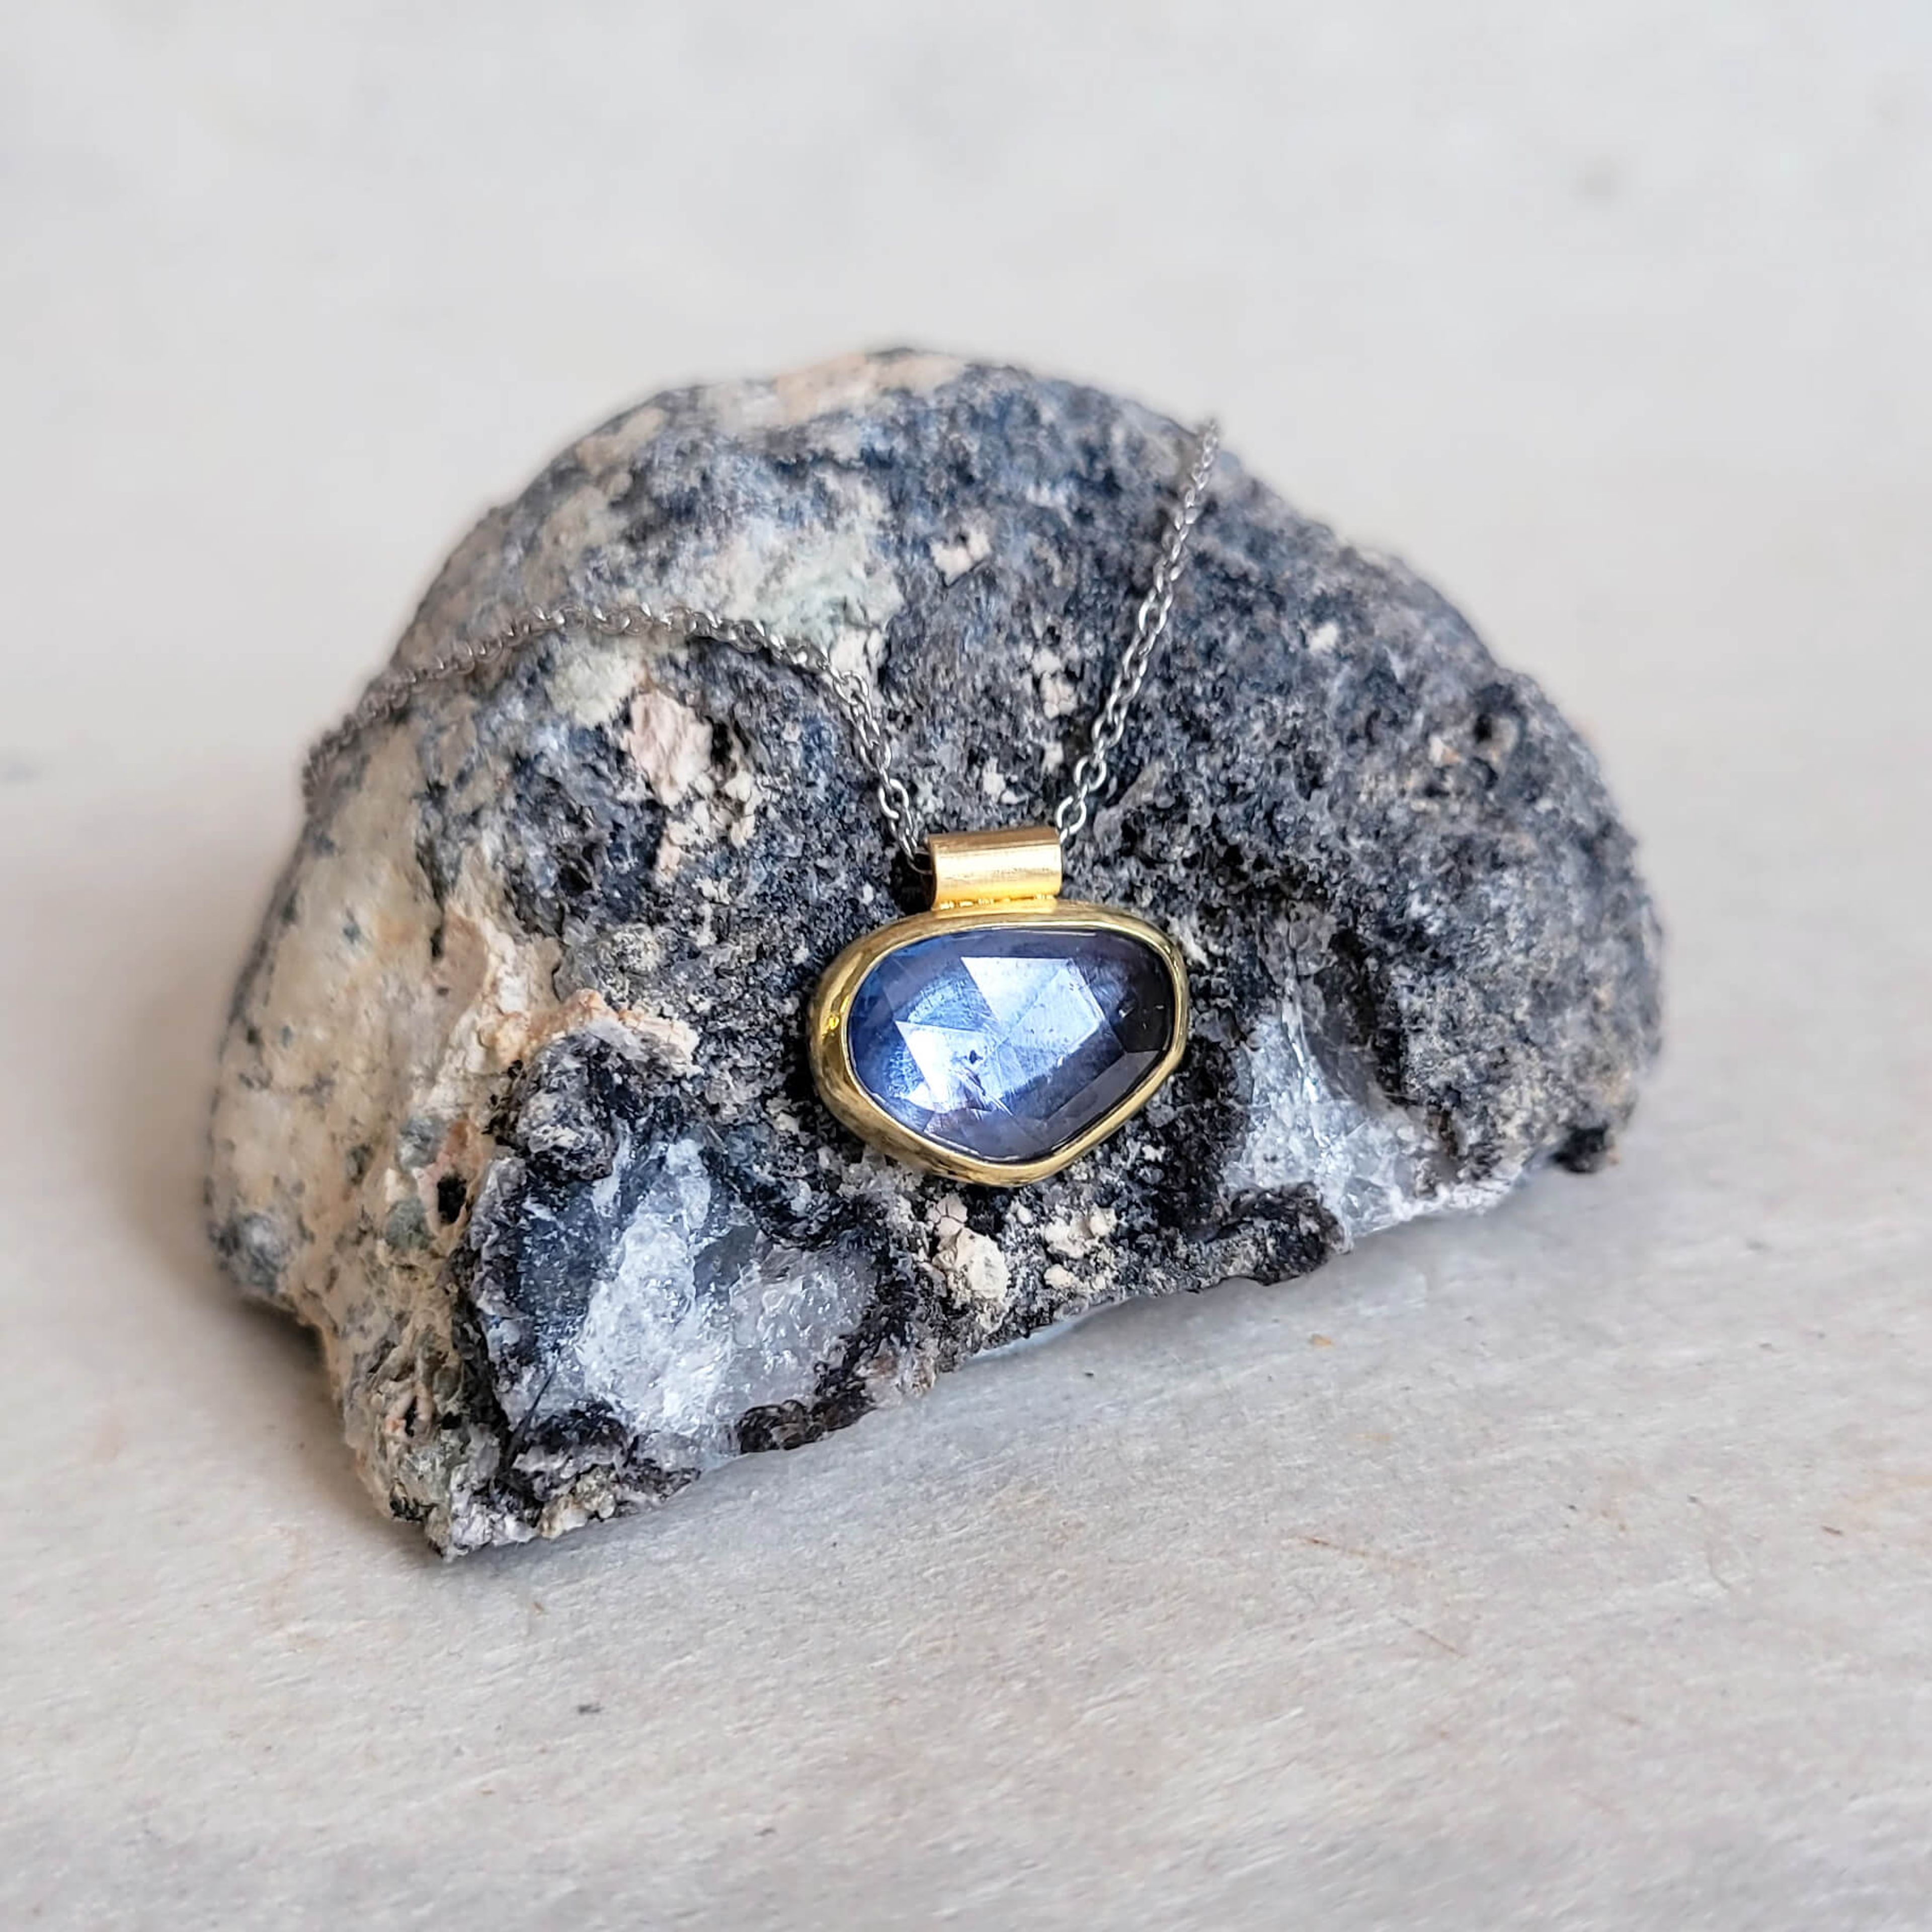 Blue Sapphire and Yellow Gold Pendant Necklace